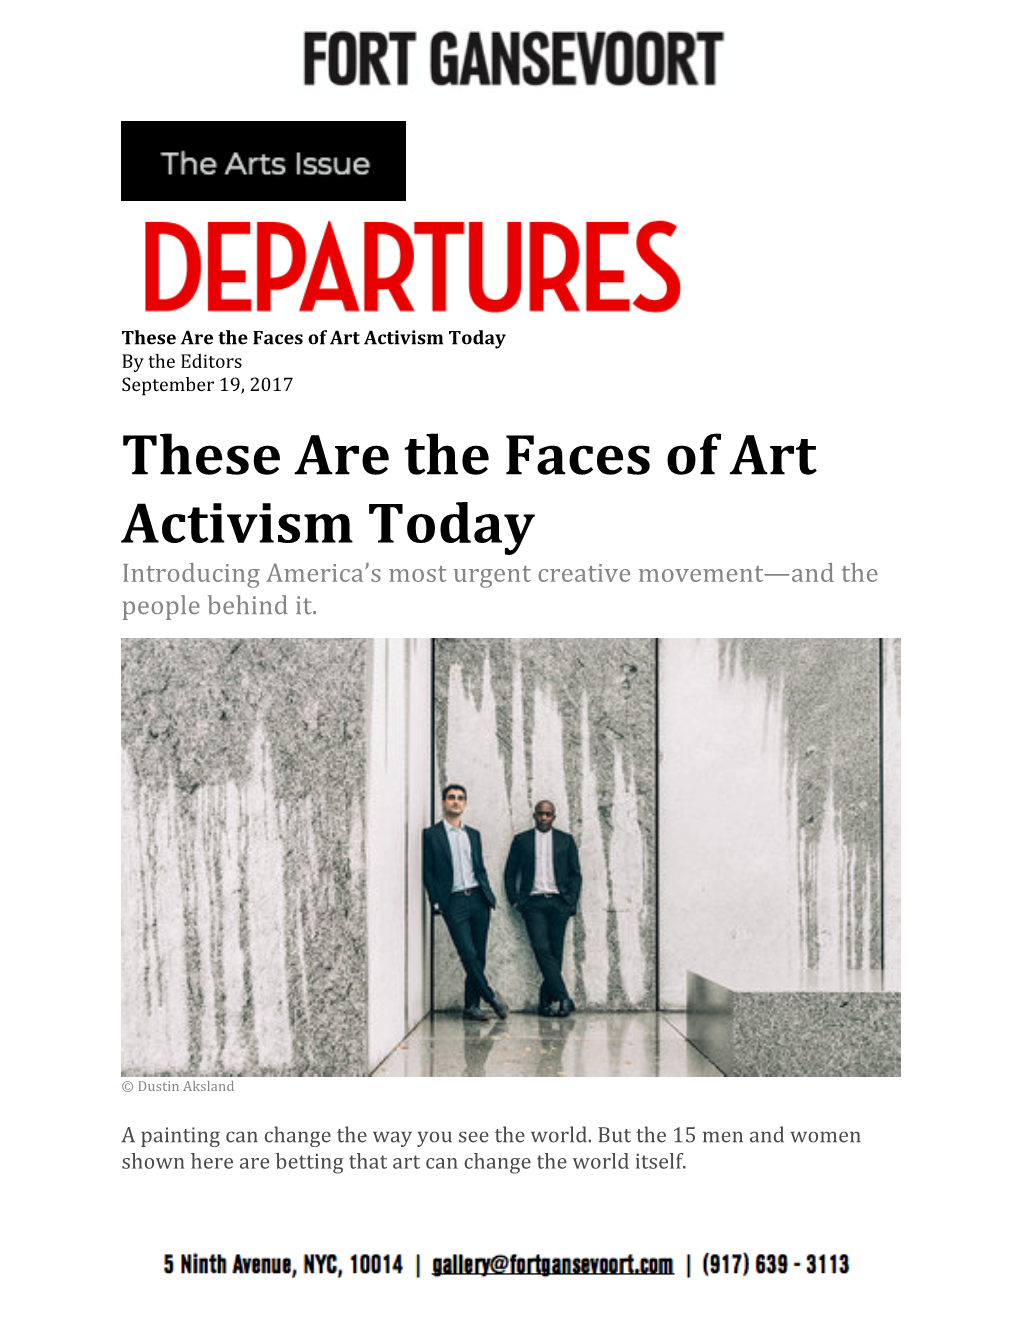 The Art Issue: Departures These Are the Faces of Art Activism Today